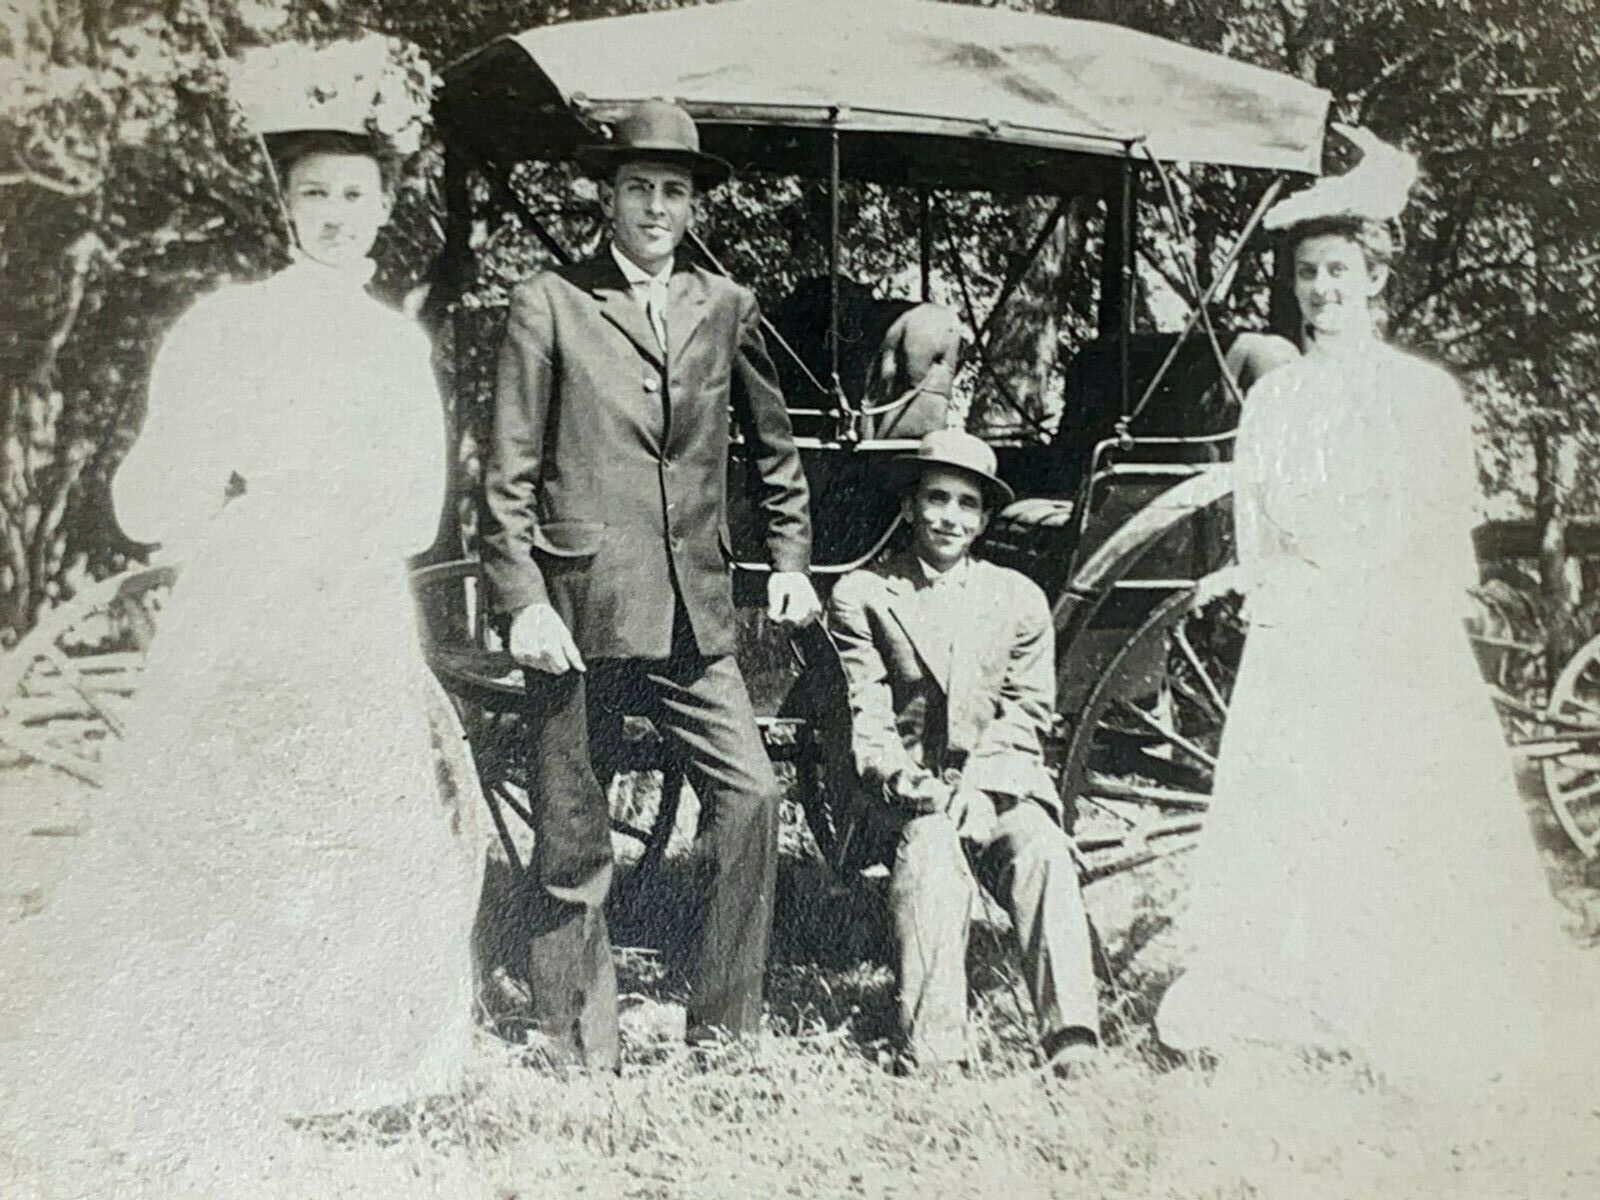 AgF) Found Photograph 2 Couples Posing Buggy Glowing White Dresses Exposure 